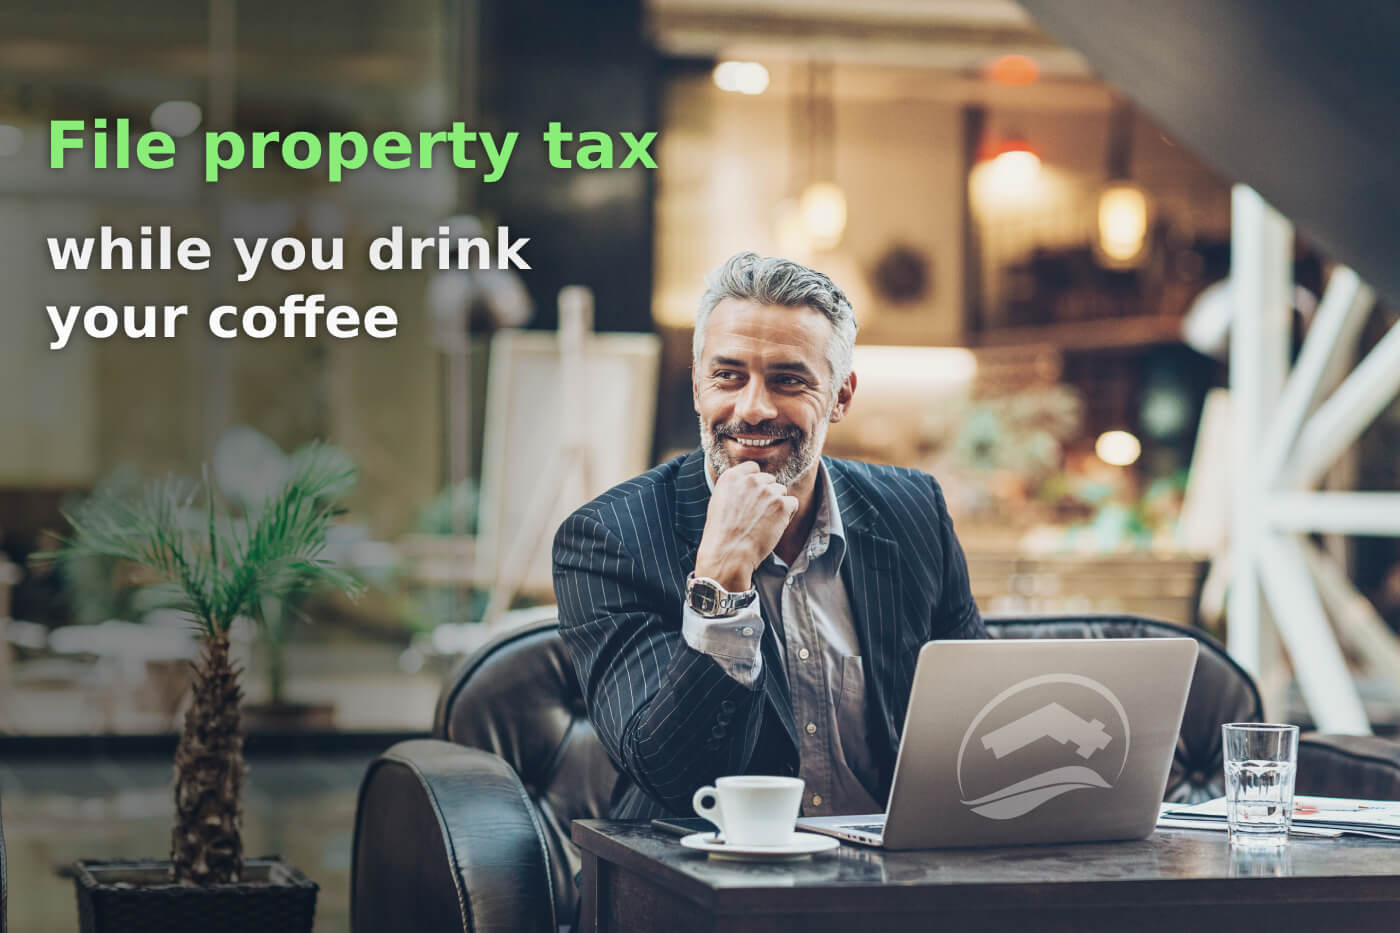 File property tax overseas while you drink your coffee